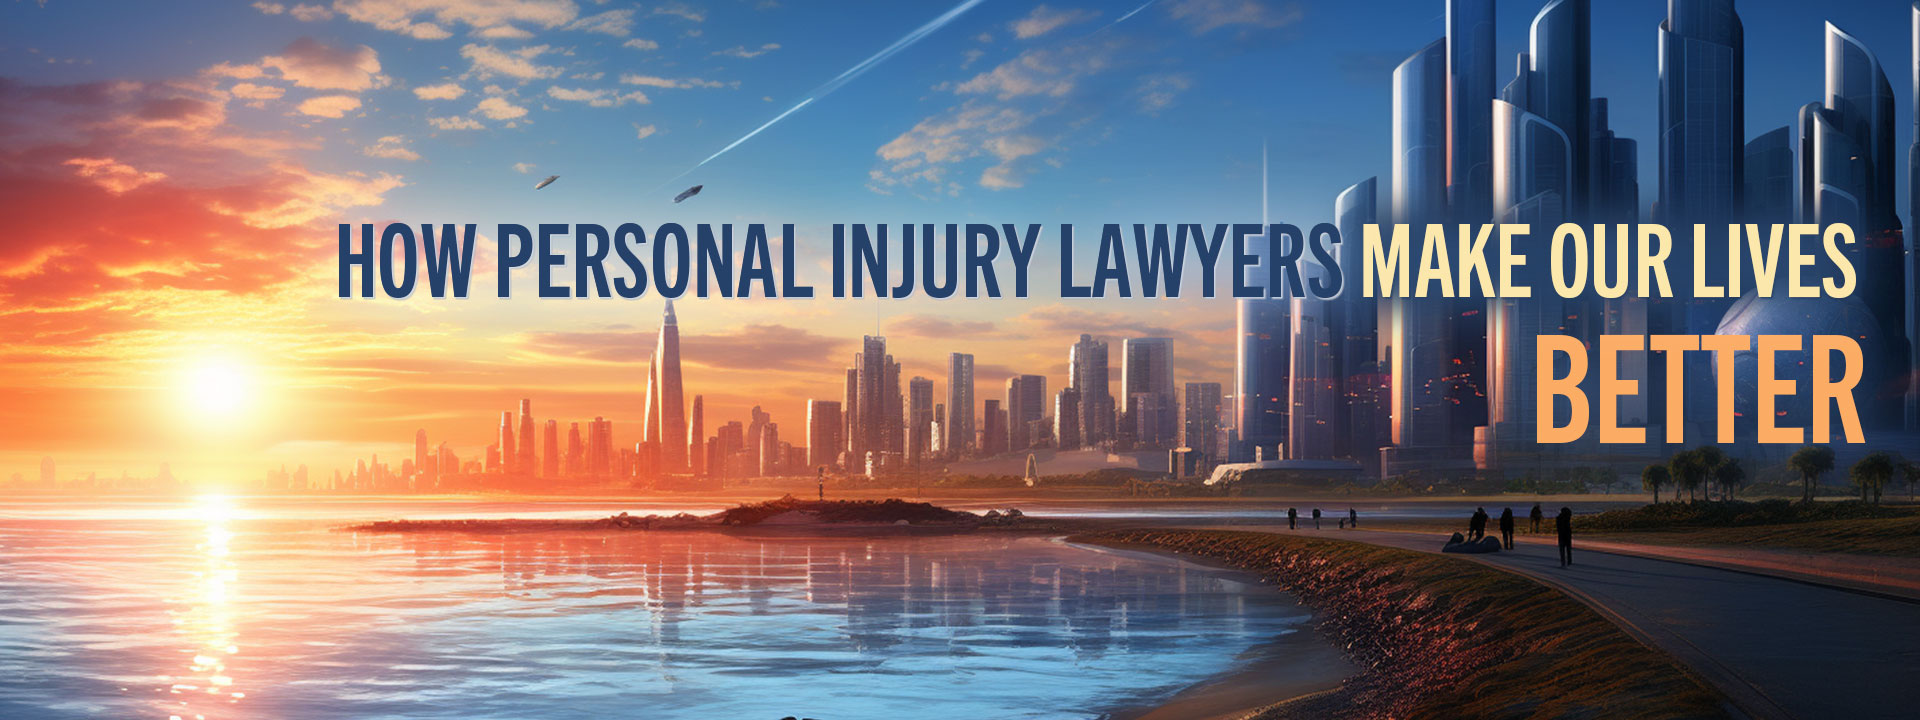 how-personal-injury-lawyers-make-our-lives-better